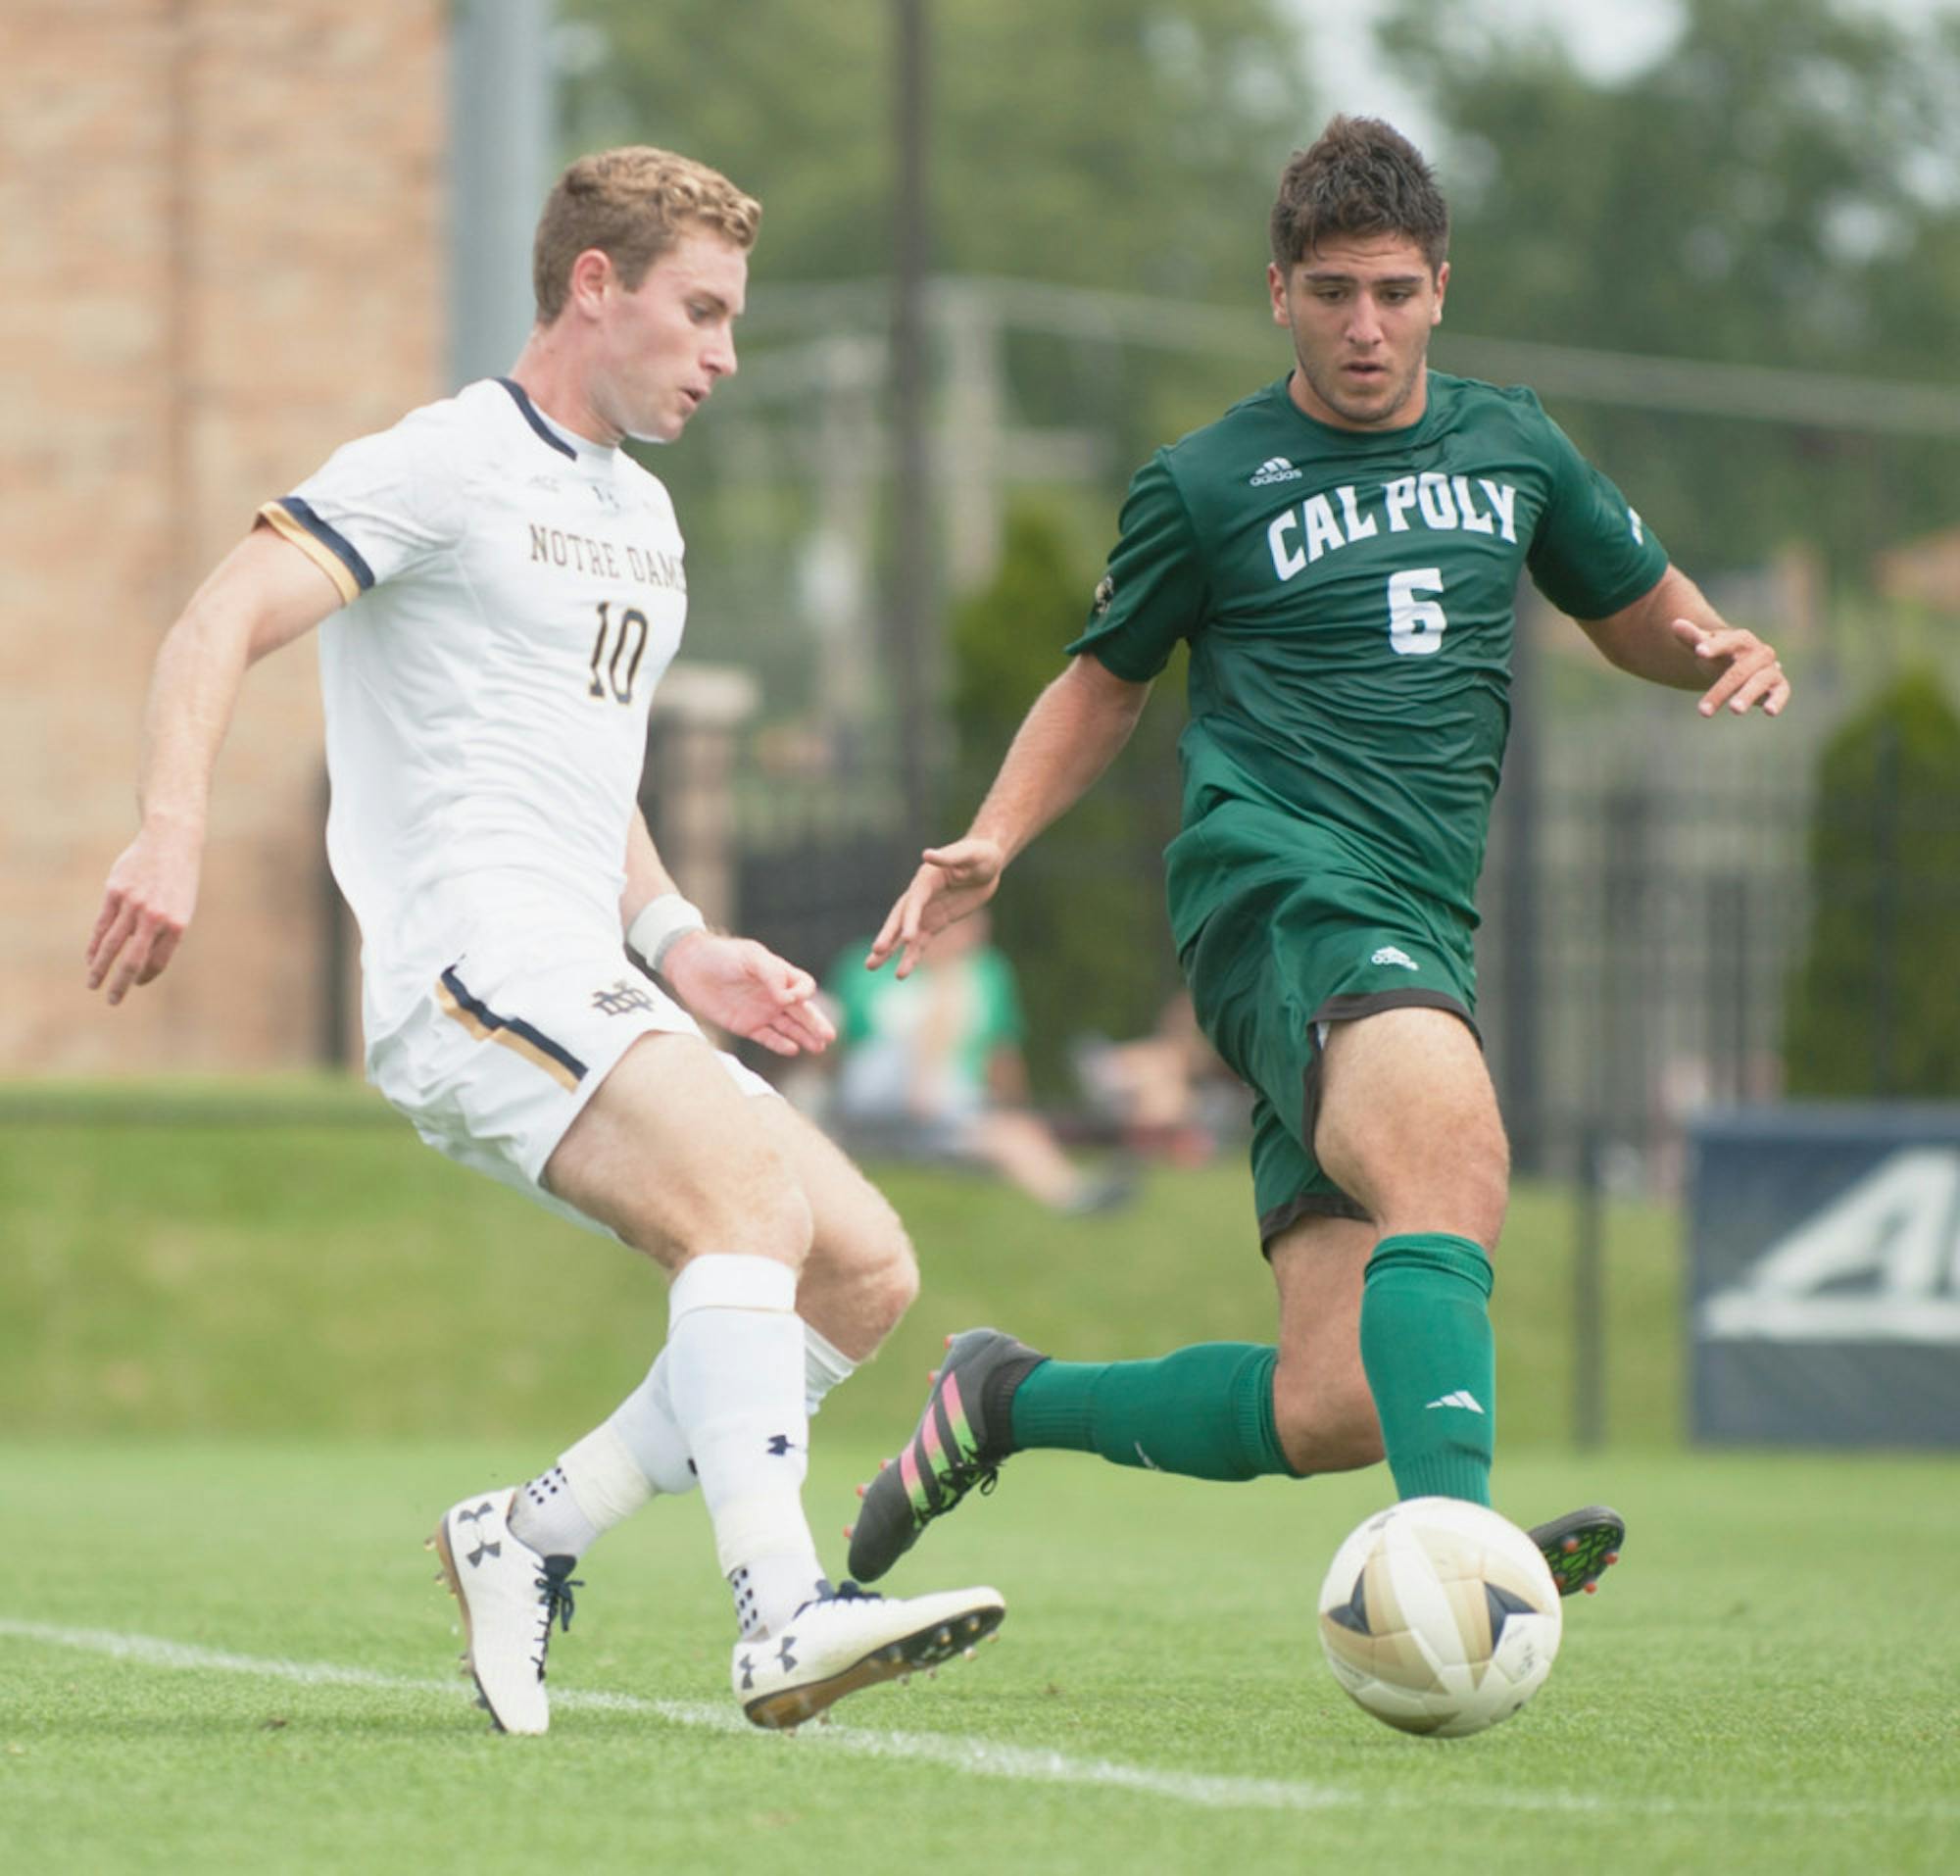 Irish senior forward Jon Gallagher takes on a Cal Poly opponent during Notre Dame's Mike Berticelli Memorial Tournament on Aug. 25 at Alumni Stadium. The Irish won 2-1 in double overtime.